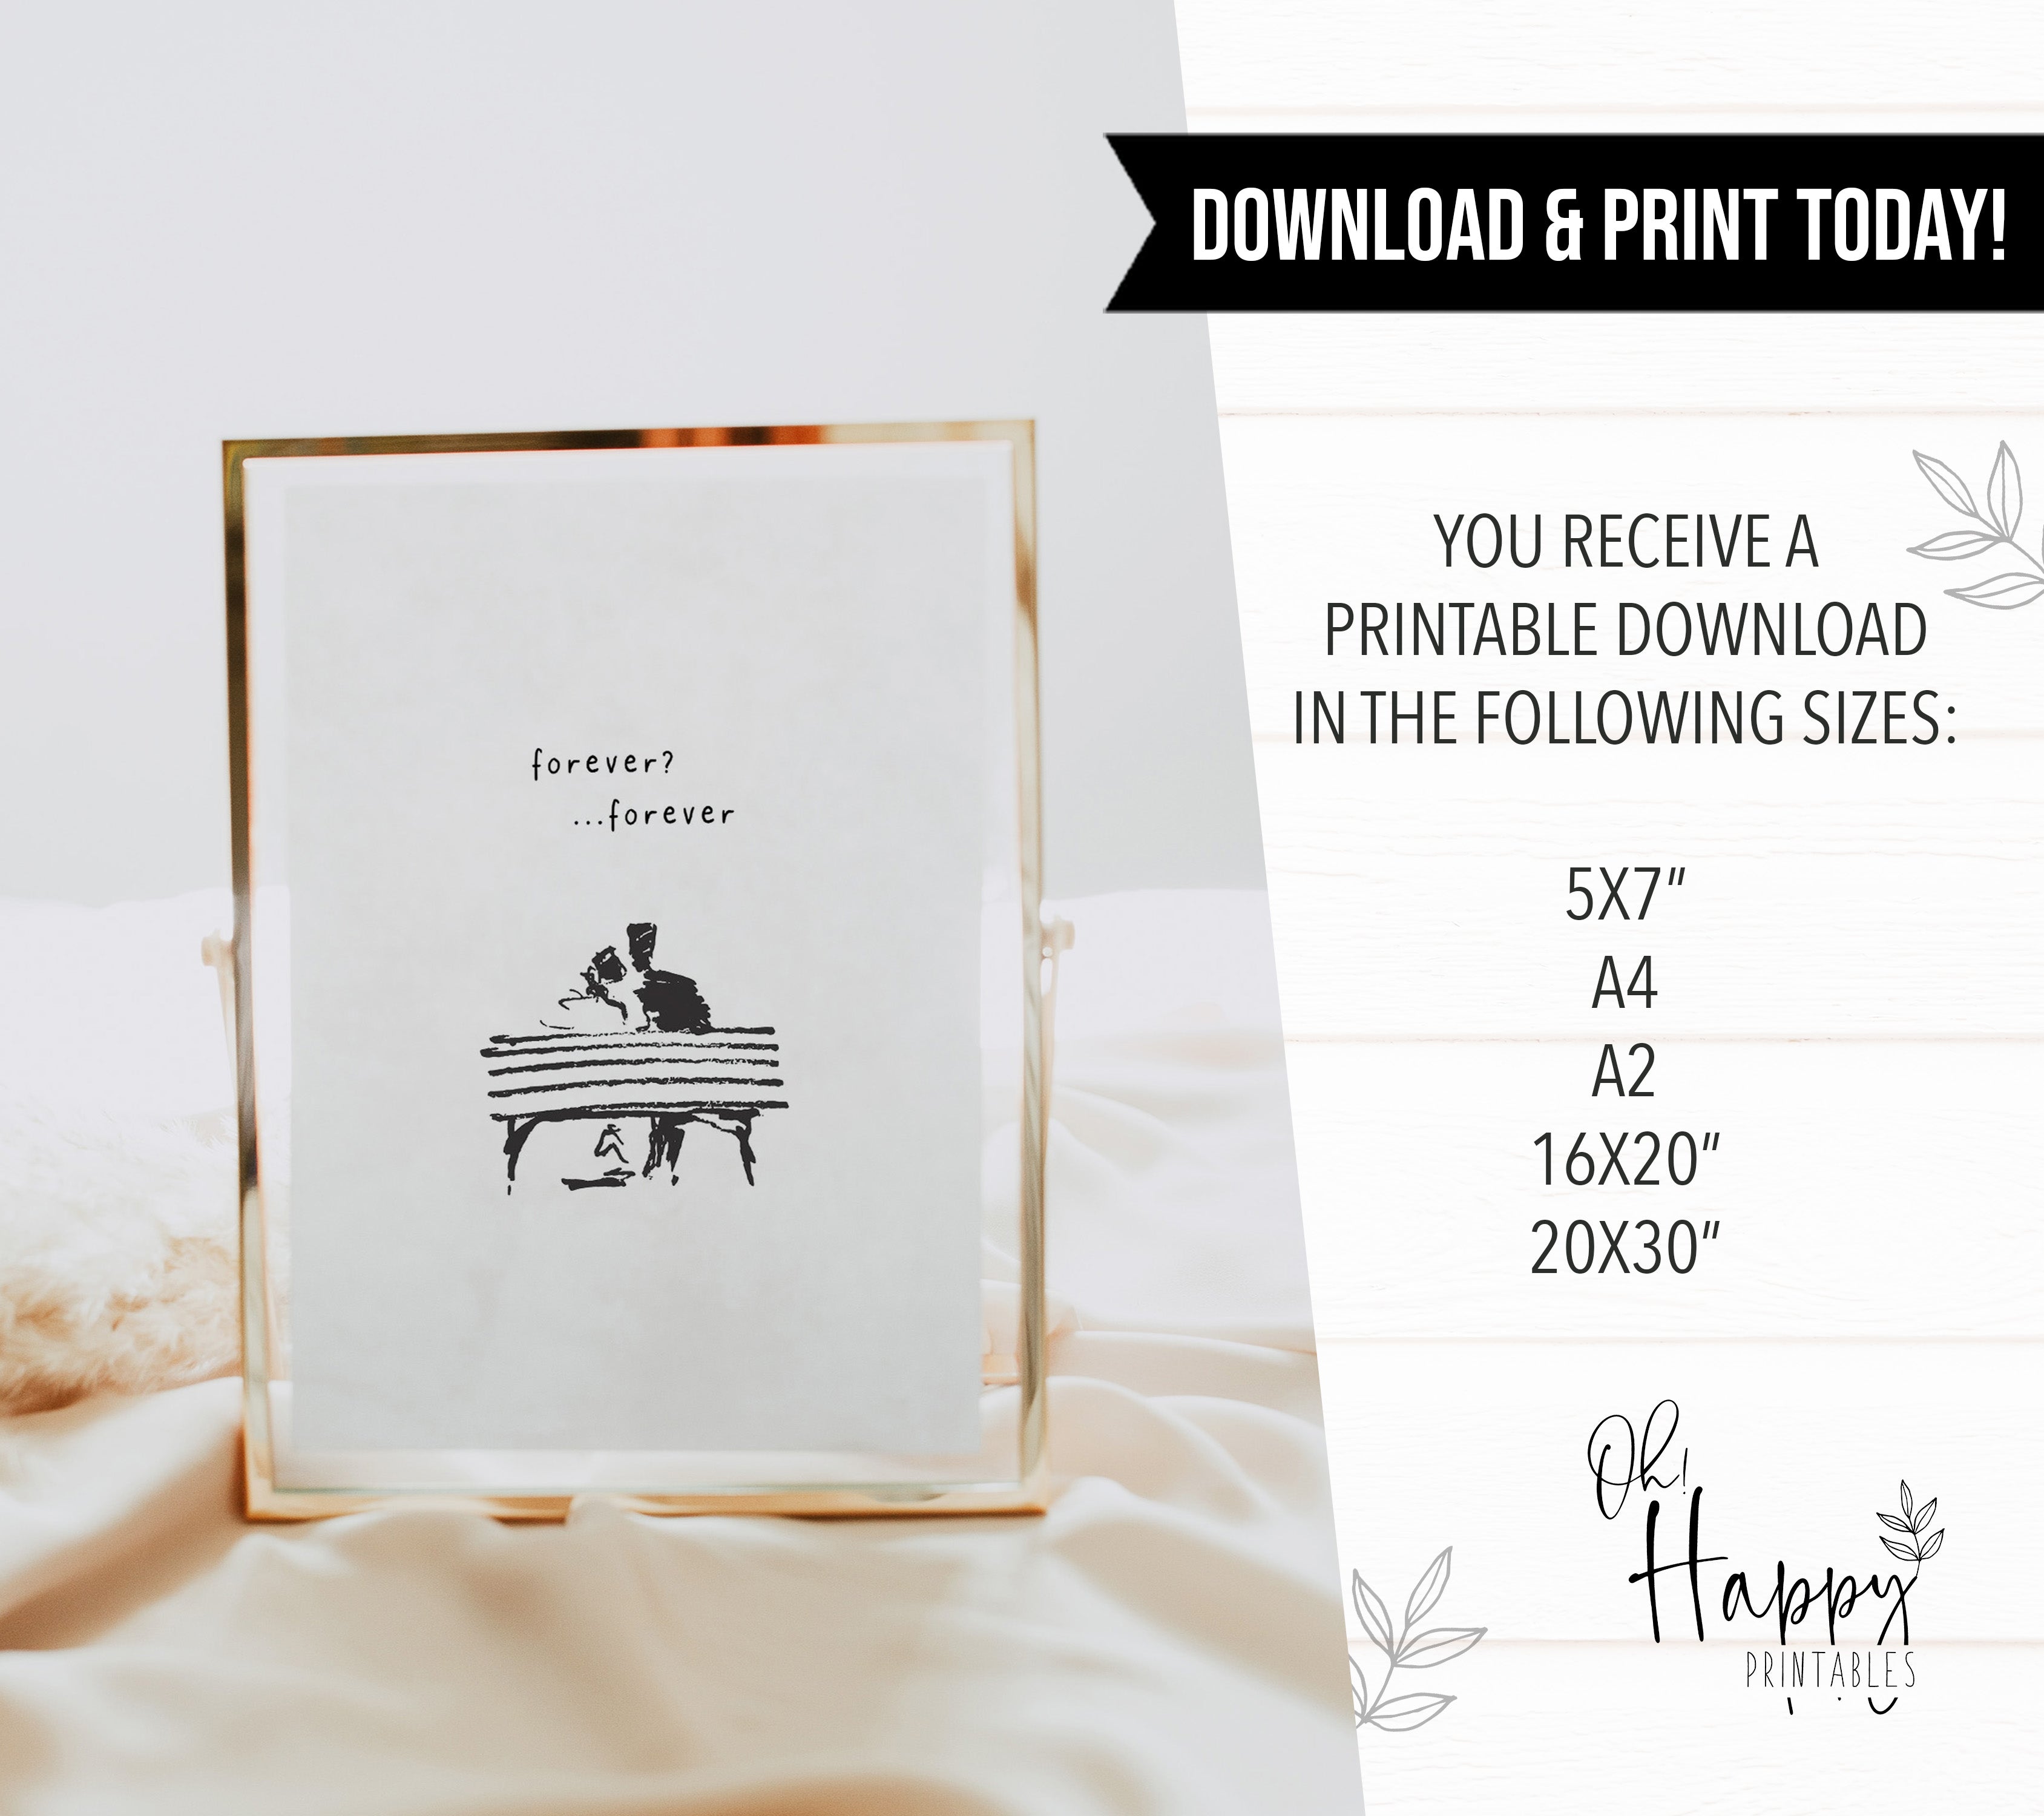 Forever Couple Gift Illustration - Couples Gift Ideas – OhHappyPrintables